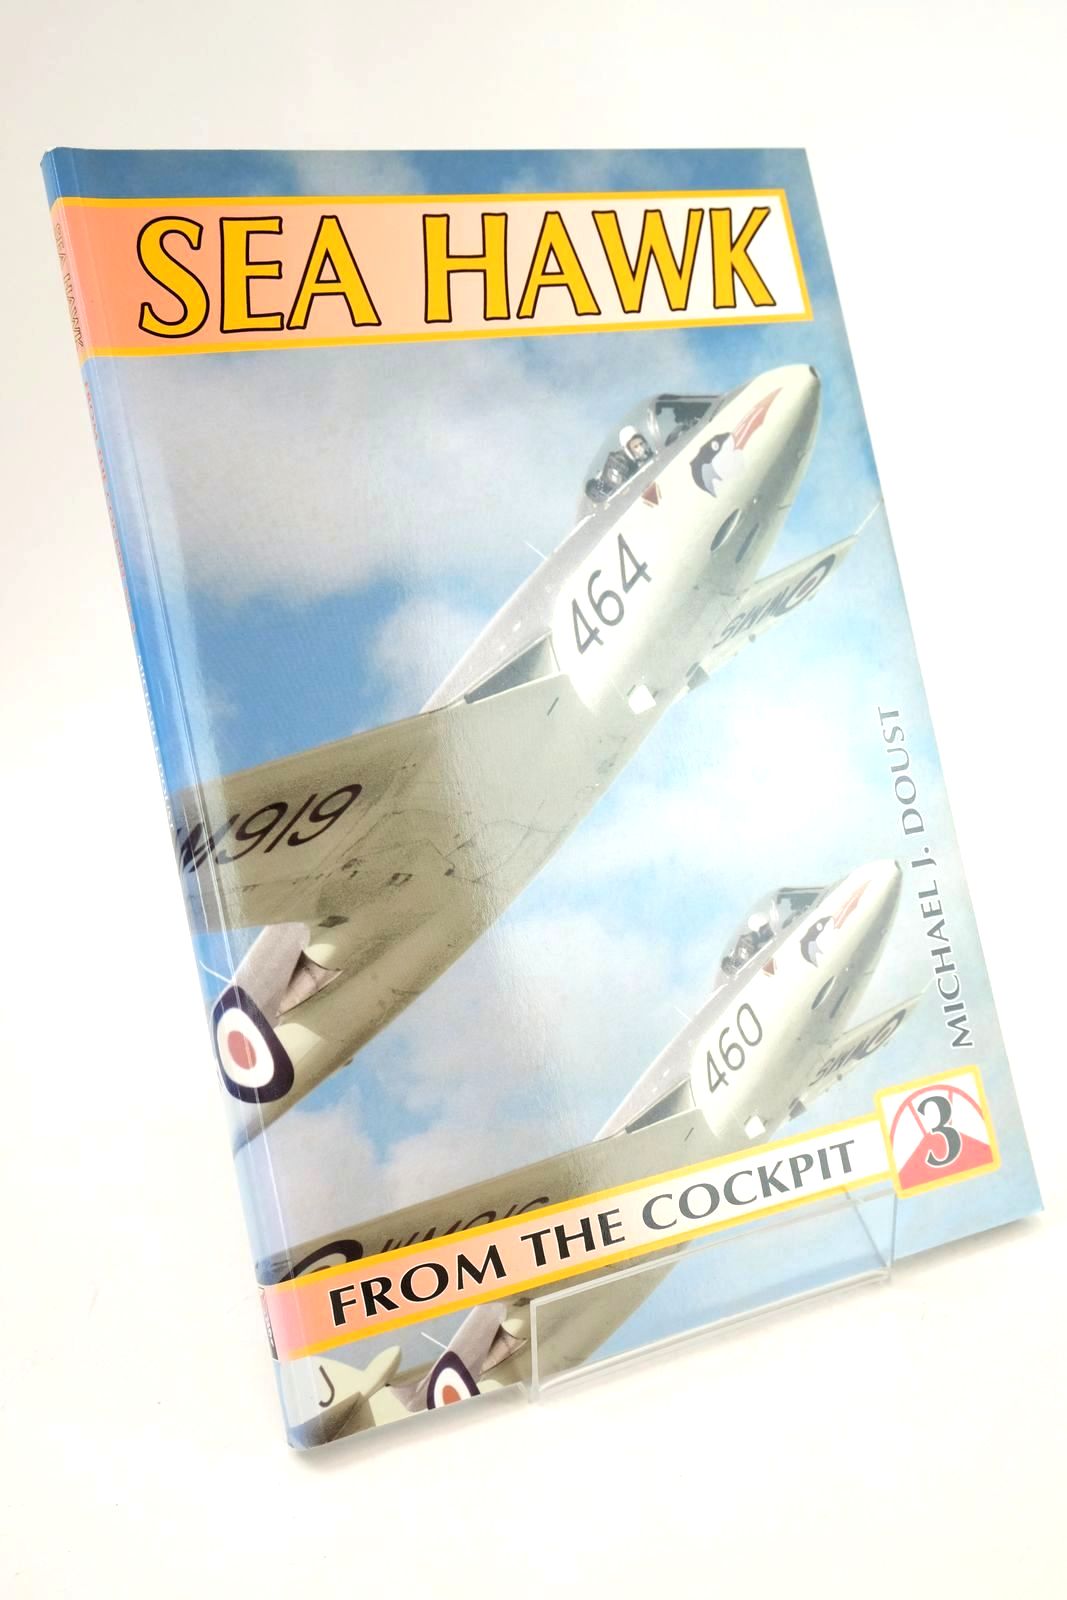 Photo of SEA HAWK (FROM THE COCKPIT 3) written by Doust, Michael J. published by Ad Hoc Publications (STOCK CODE: 1325168)  for sale by Stella & Rose's Books